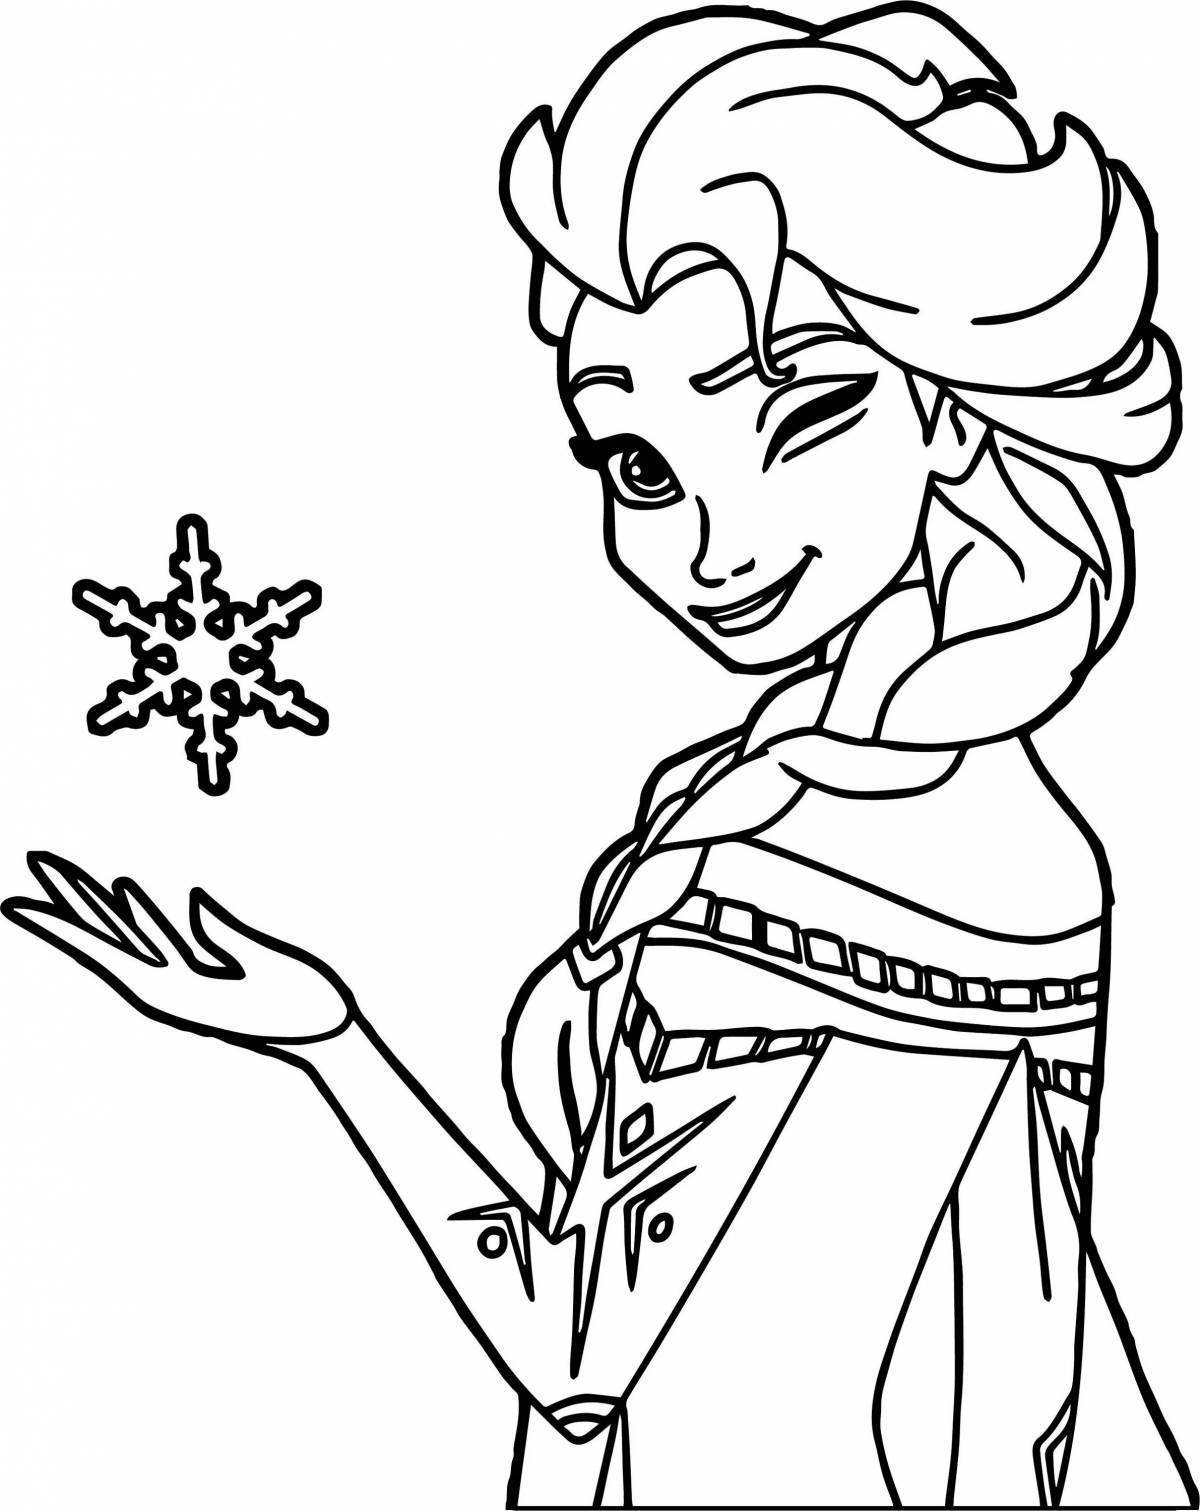 Elsa adorable coloring game for girls